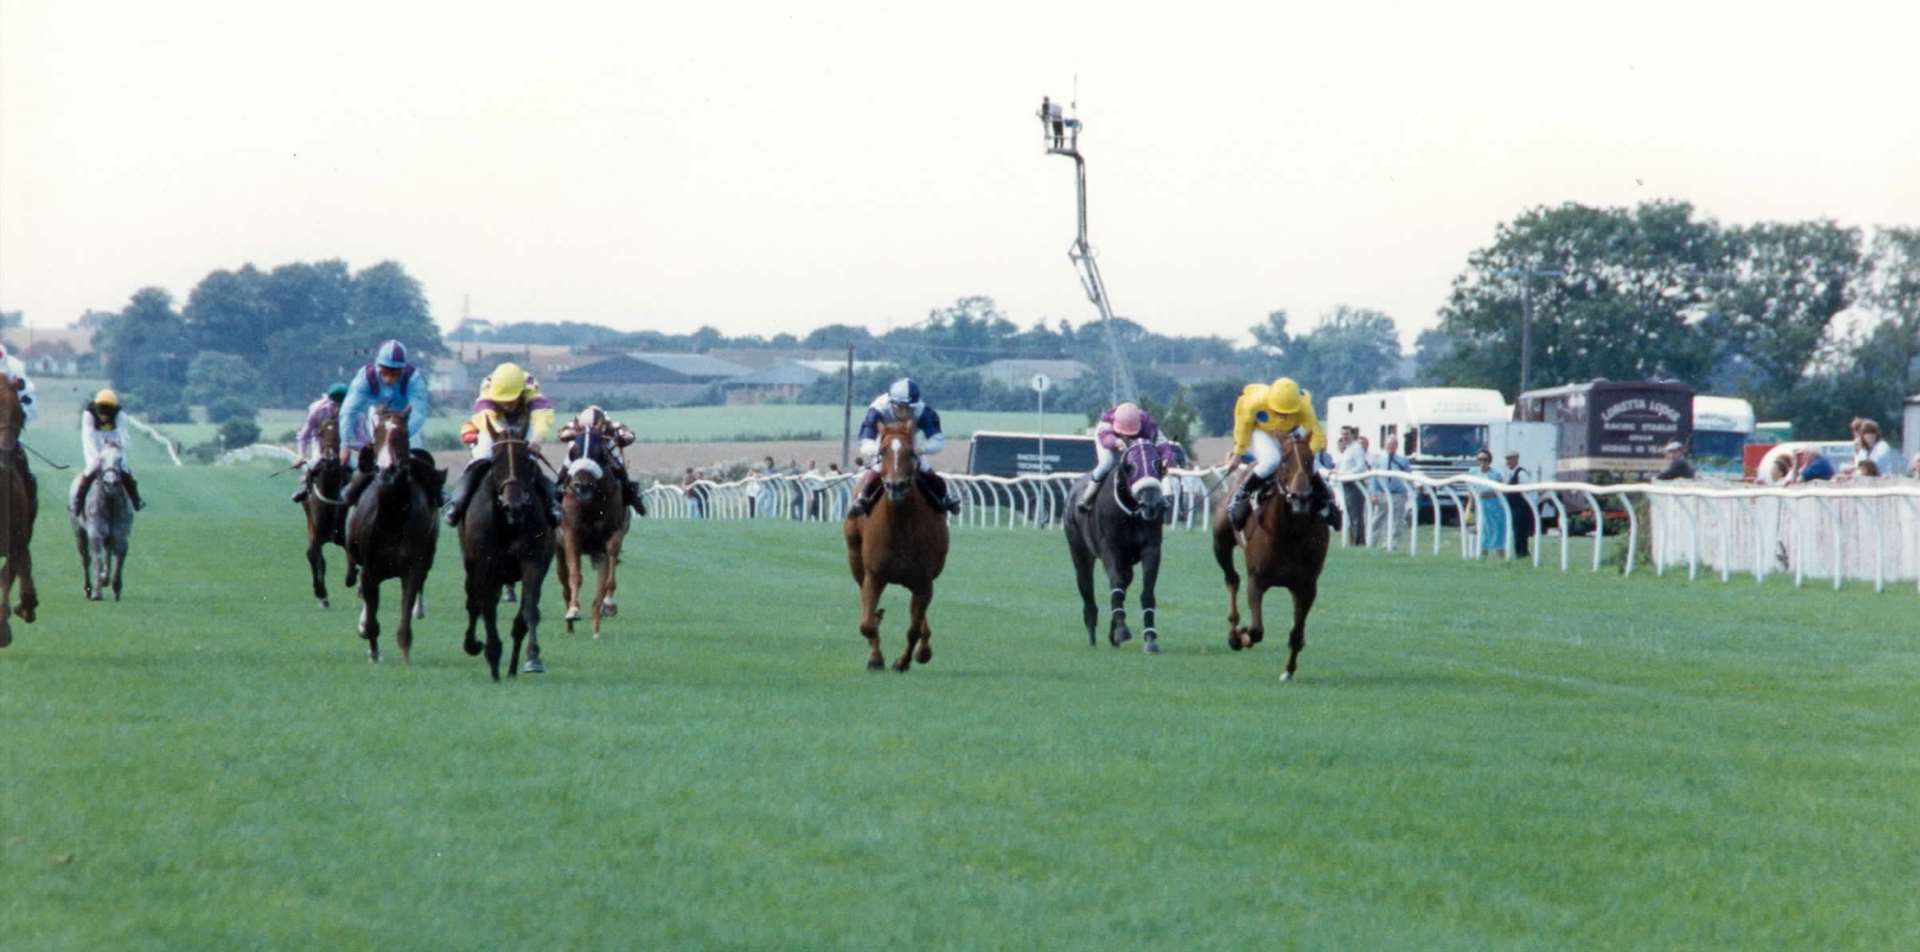 The track - pictured here in 1991 - hosted scores of events during its 114-year existence